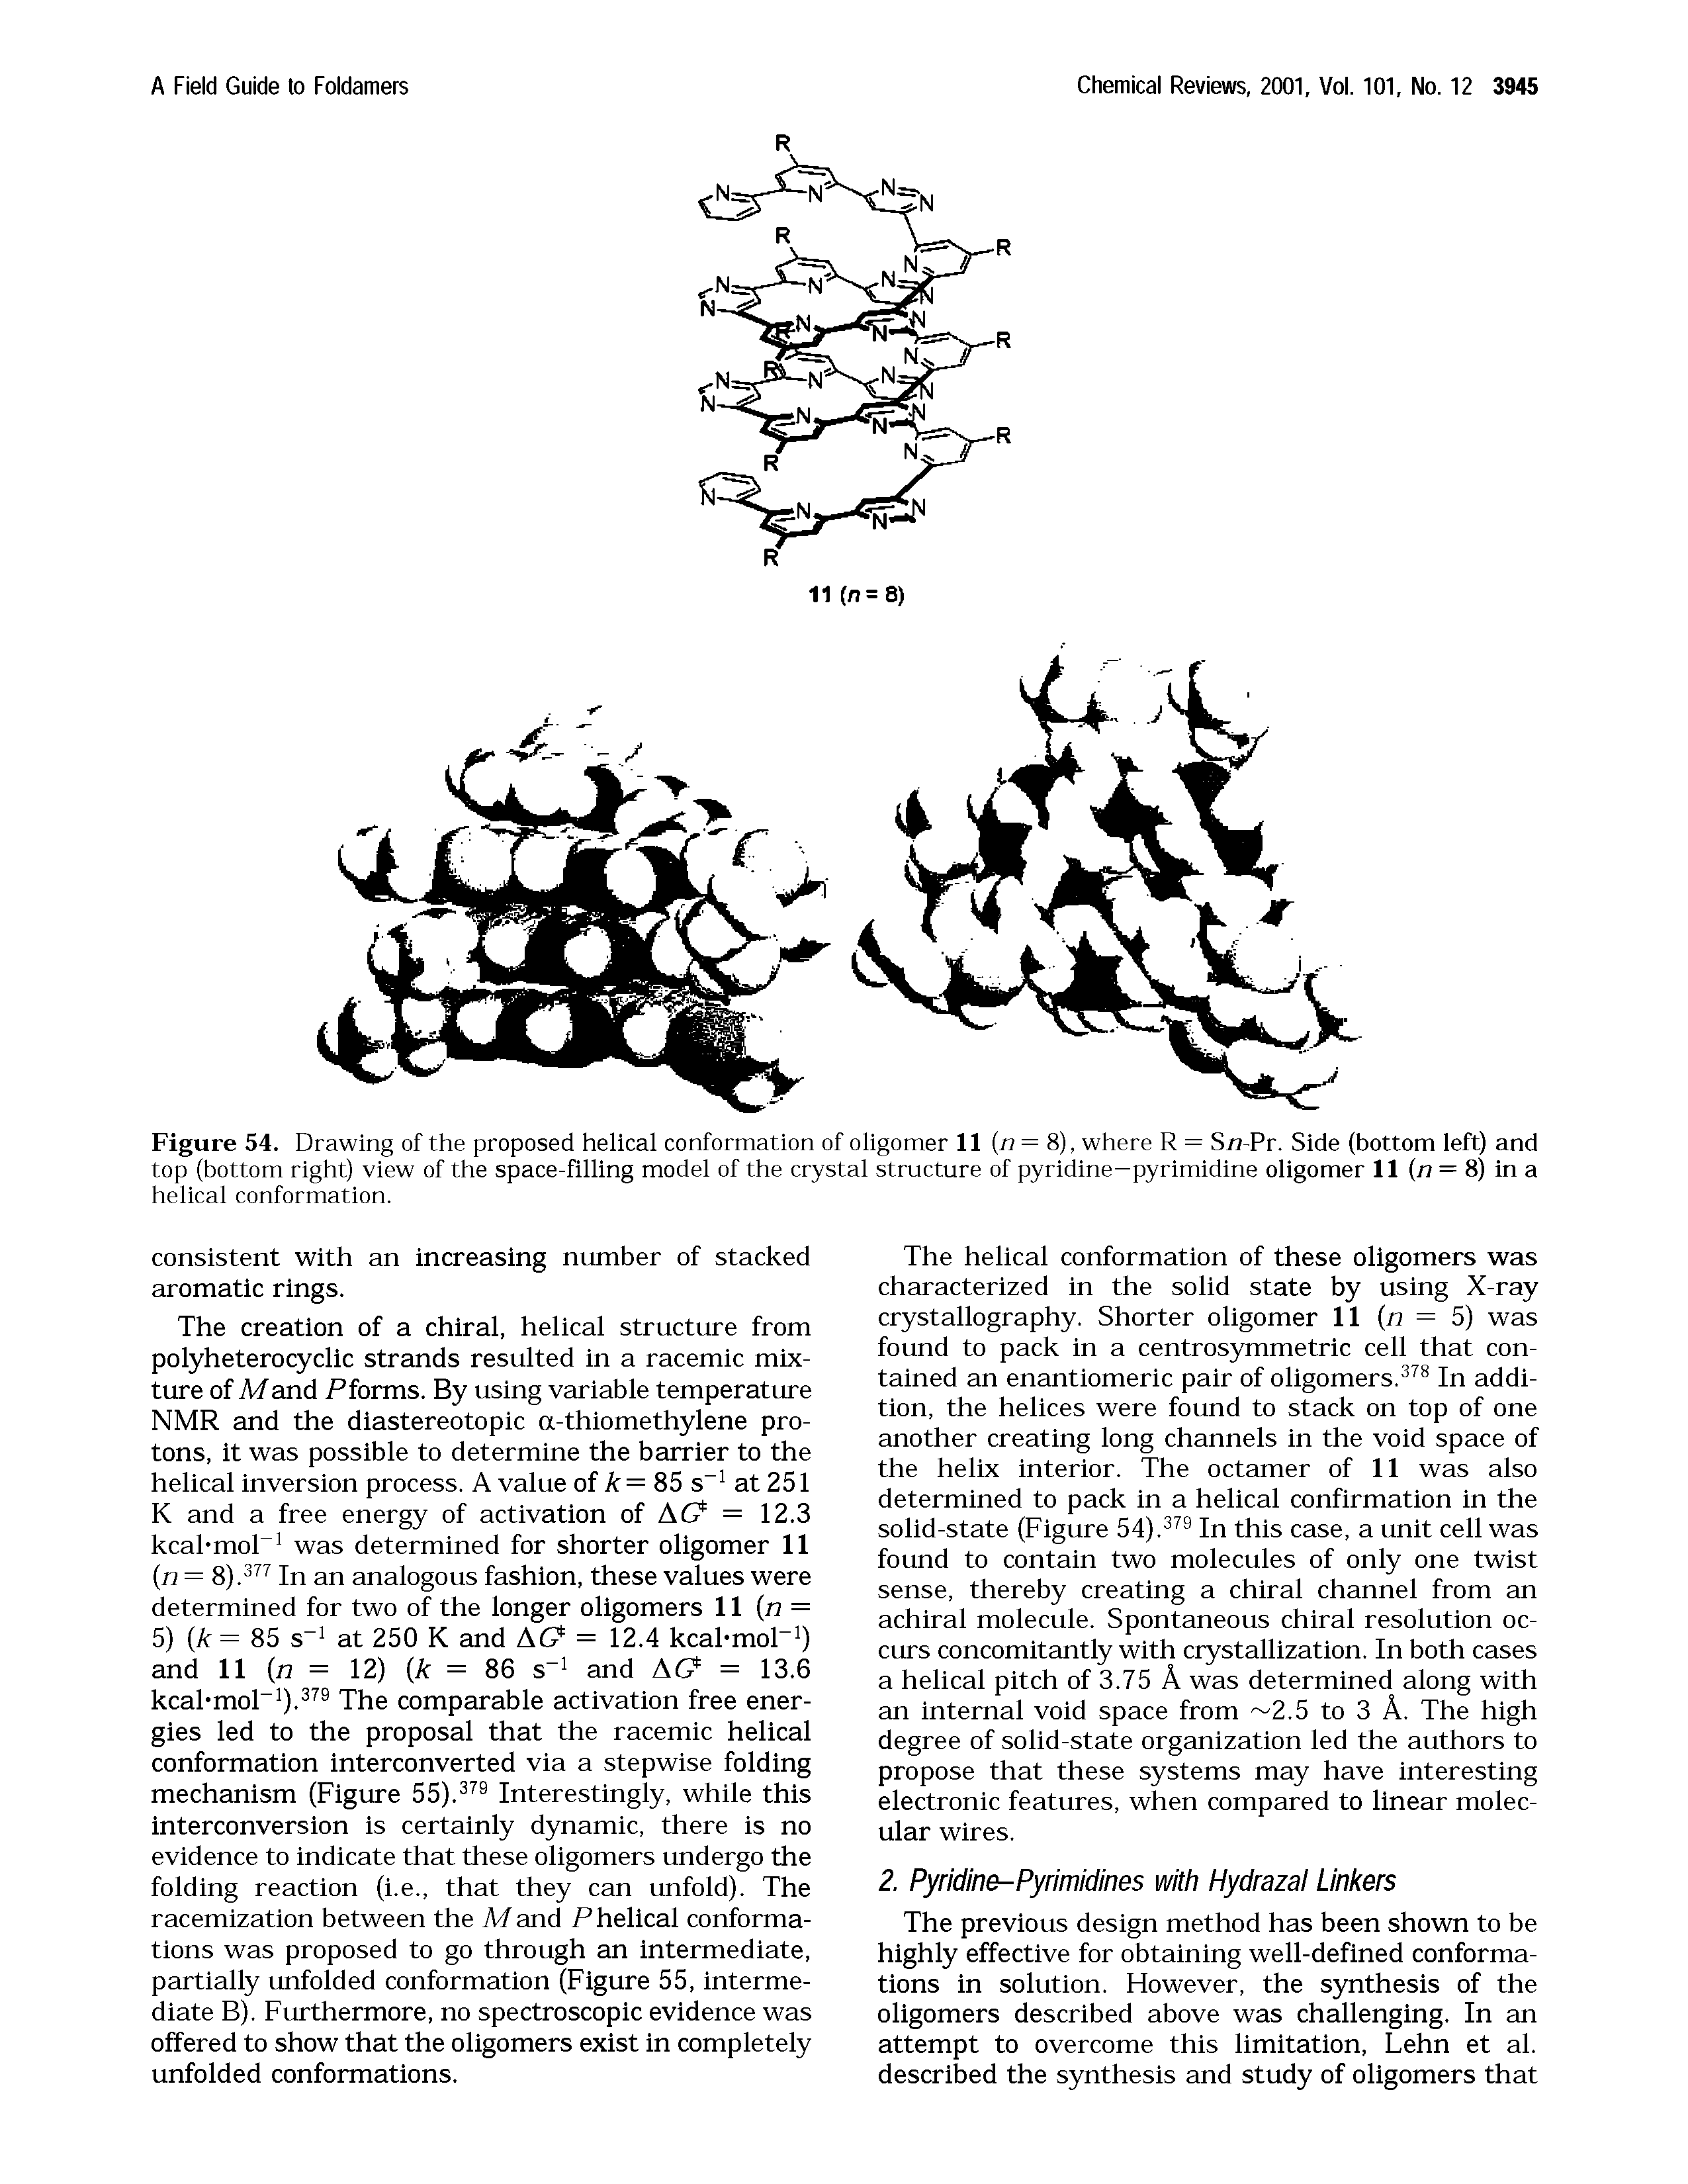 Figure 54. Drawing of the proposed helical conformation of oligomer 11 (n= 8), where R = Sn-Pr. Side (bottom left) and top (bottom right) view of the space-filling model of the crystal structure of pyridine—pyrimidine oligomer 11 (n = 8) in a helical conformation.